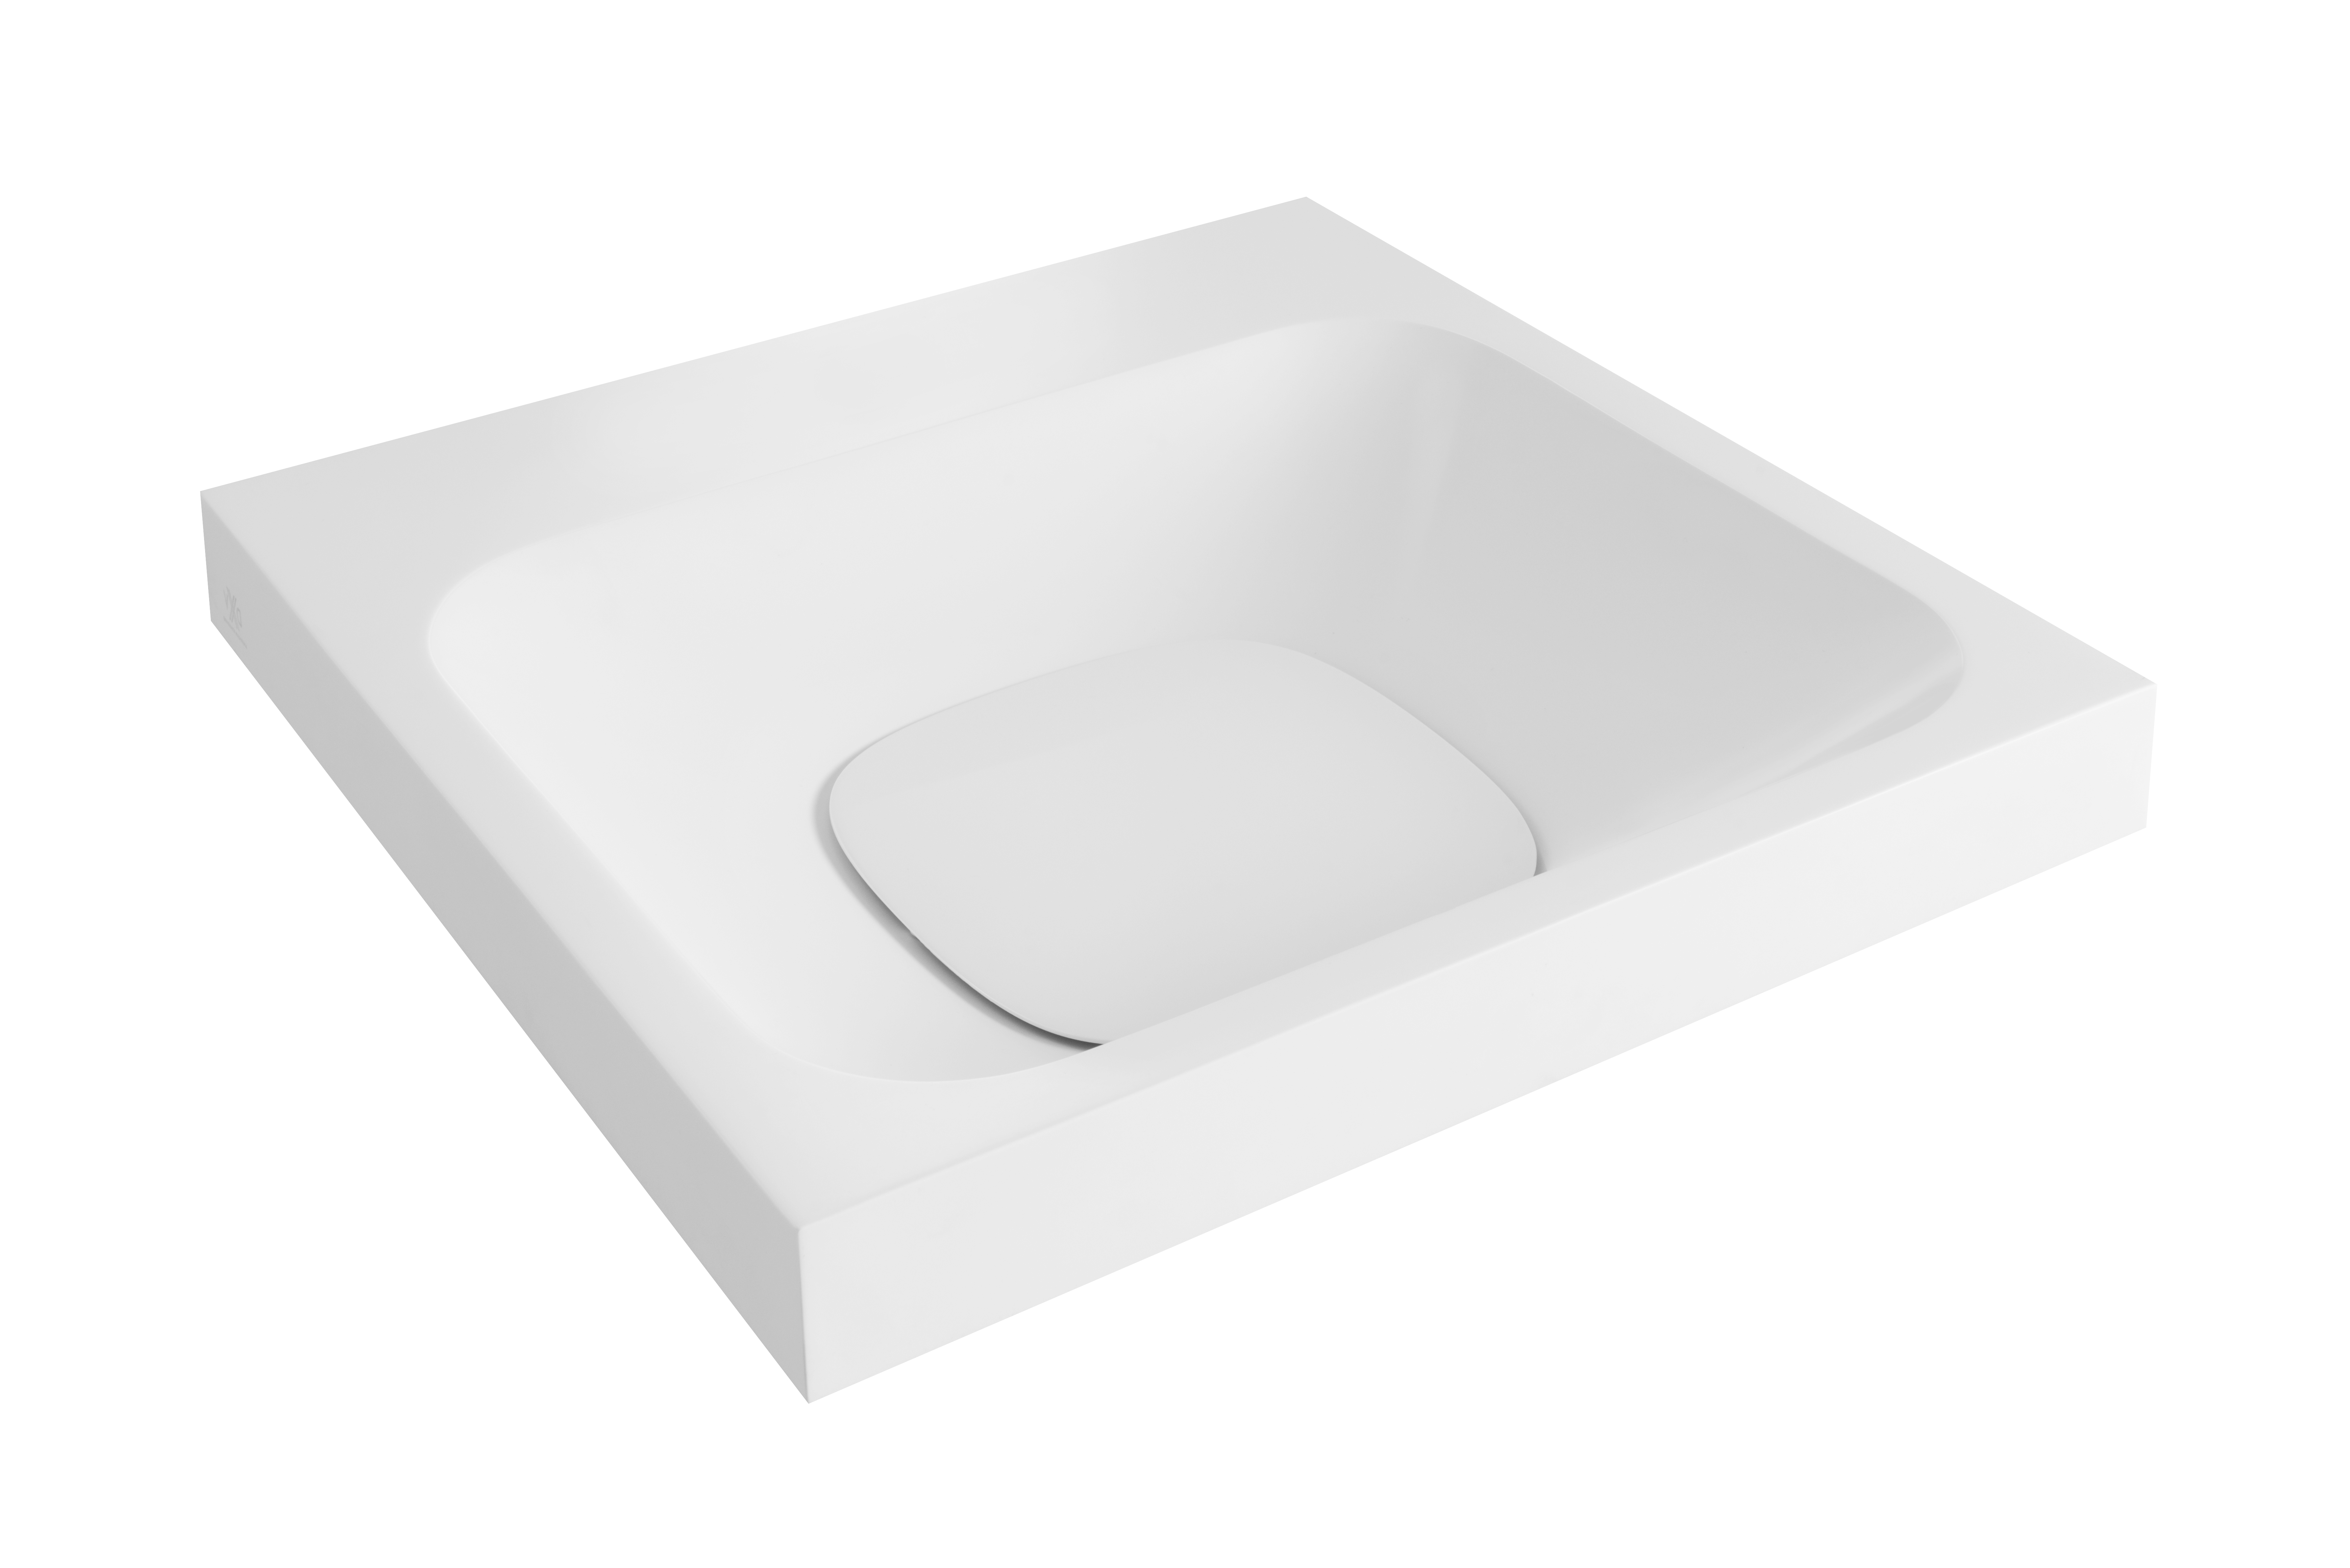 DXV Modulus® 21 in. Sink, No Hole